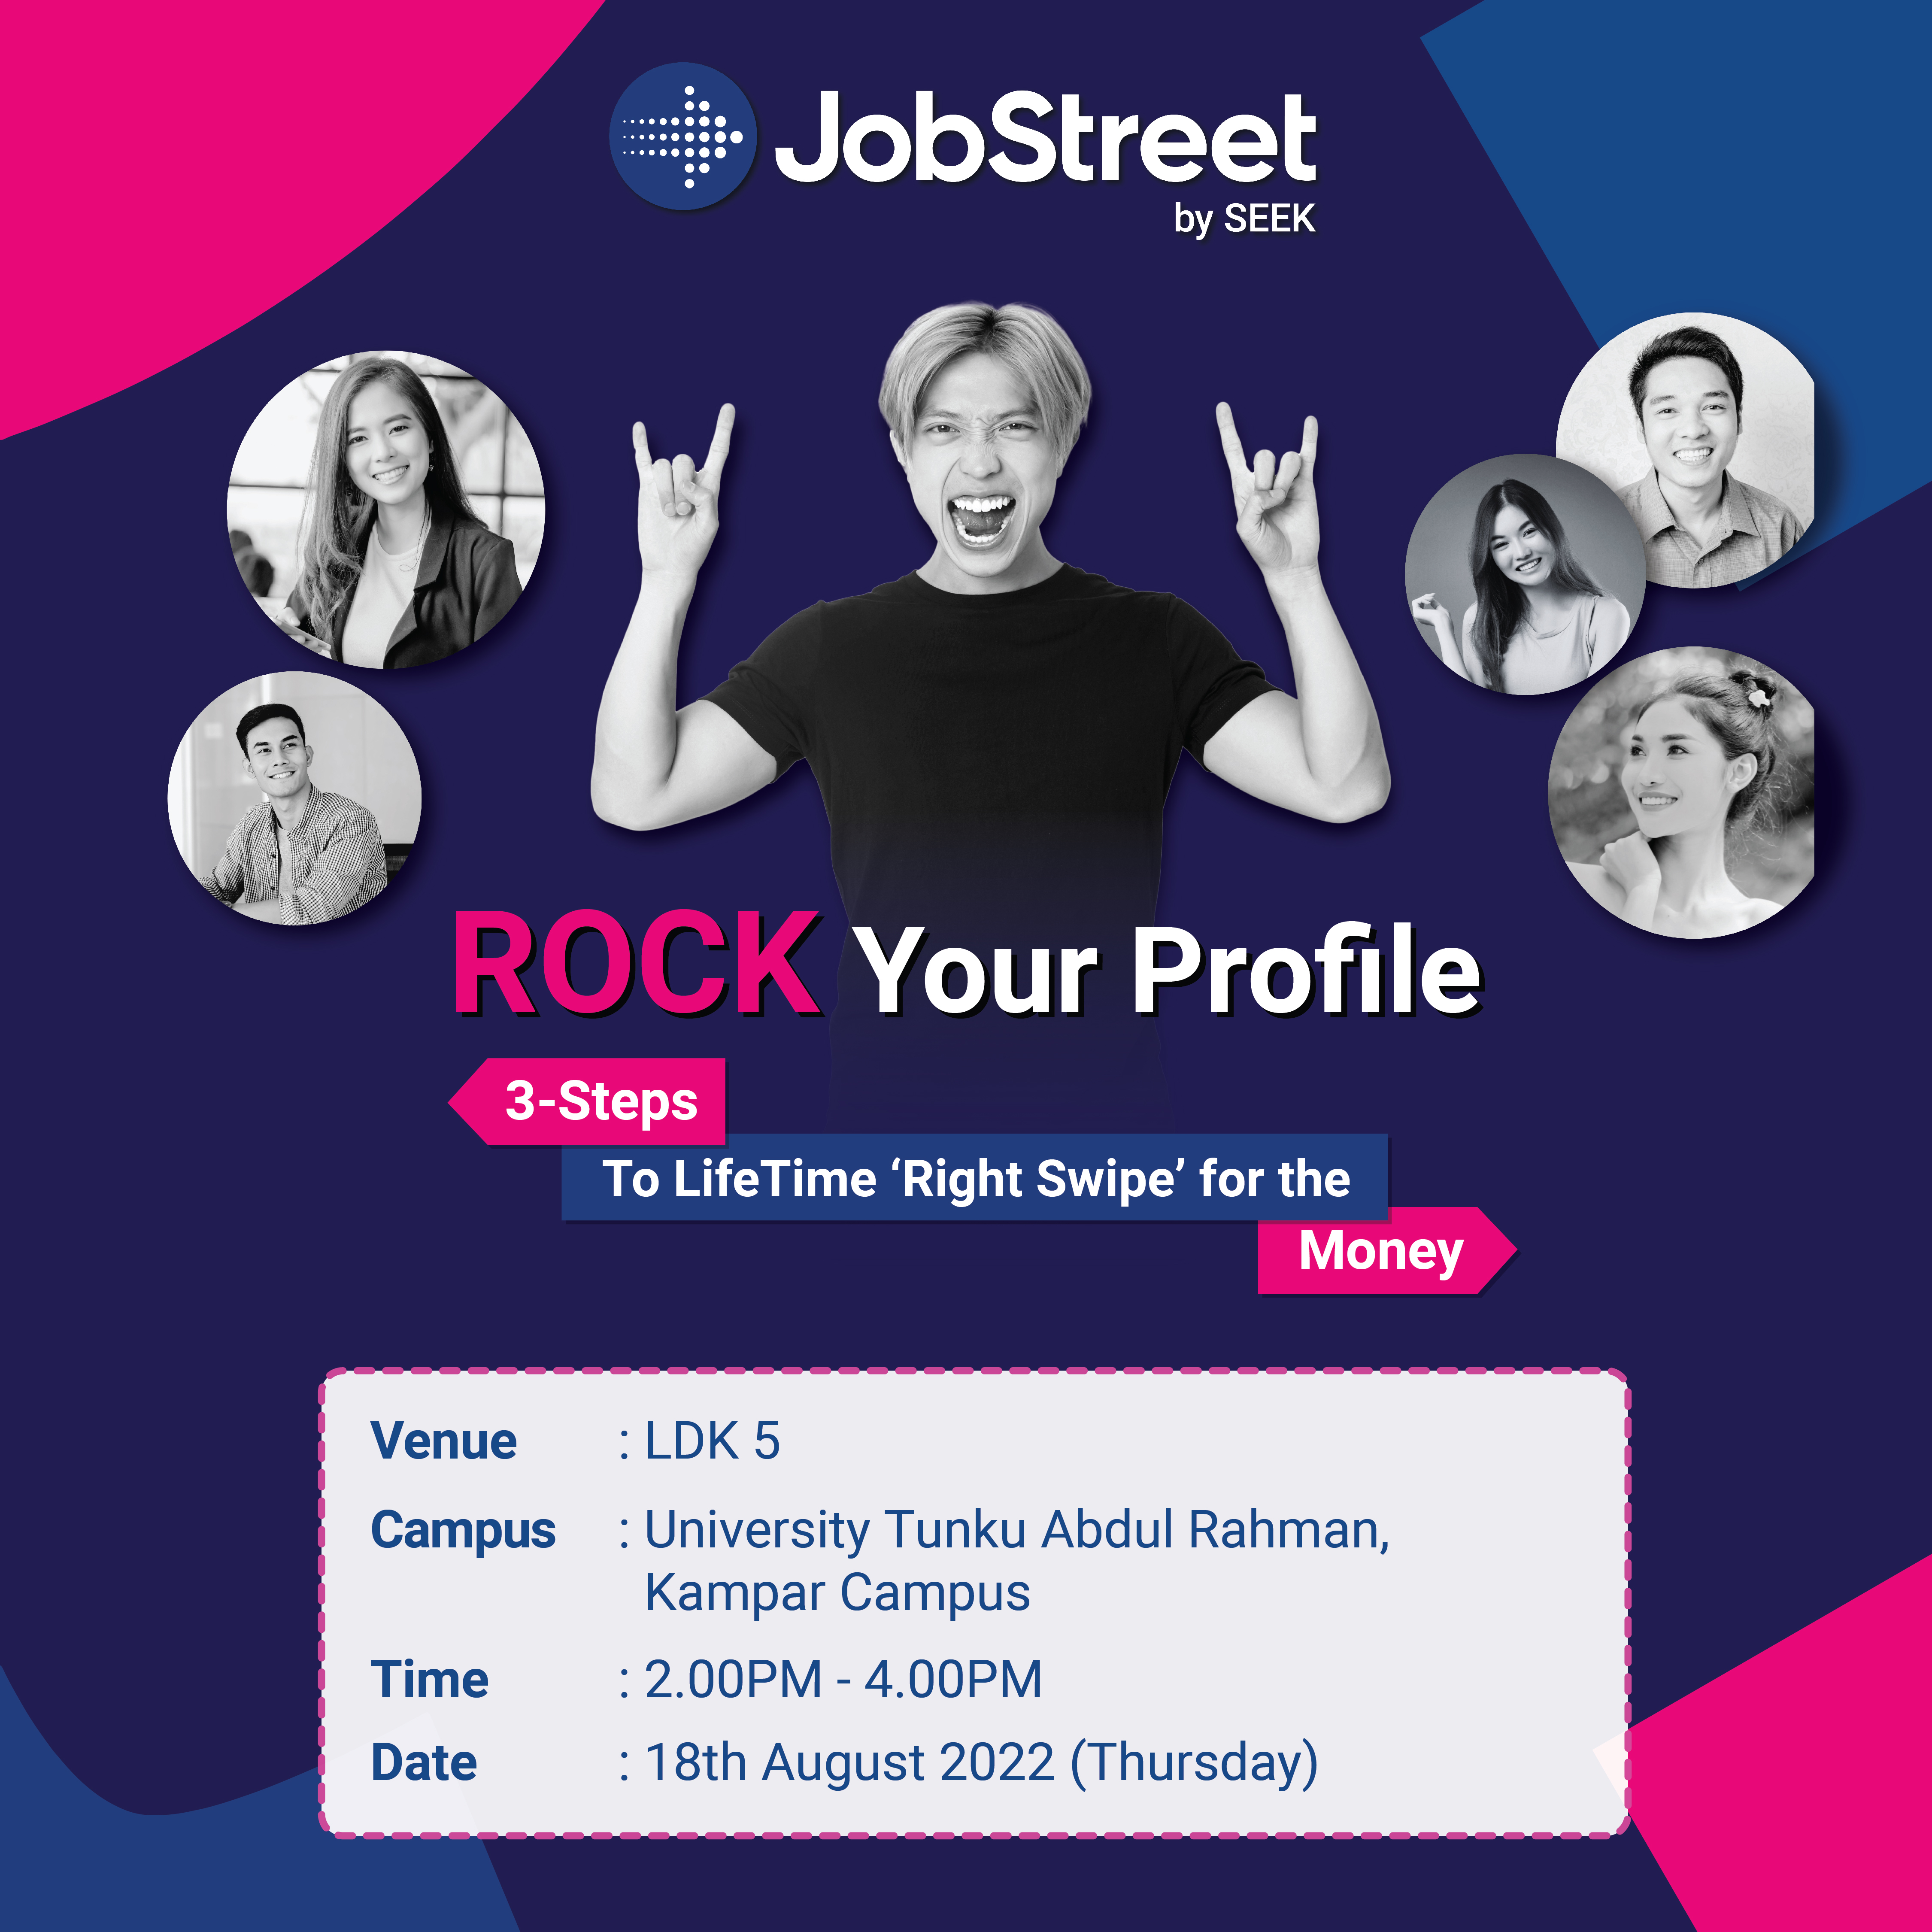 In collaboration with JobStreet, let's ROCK YOUR PROFILE and set a yourself straight for your career!